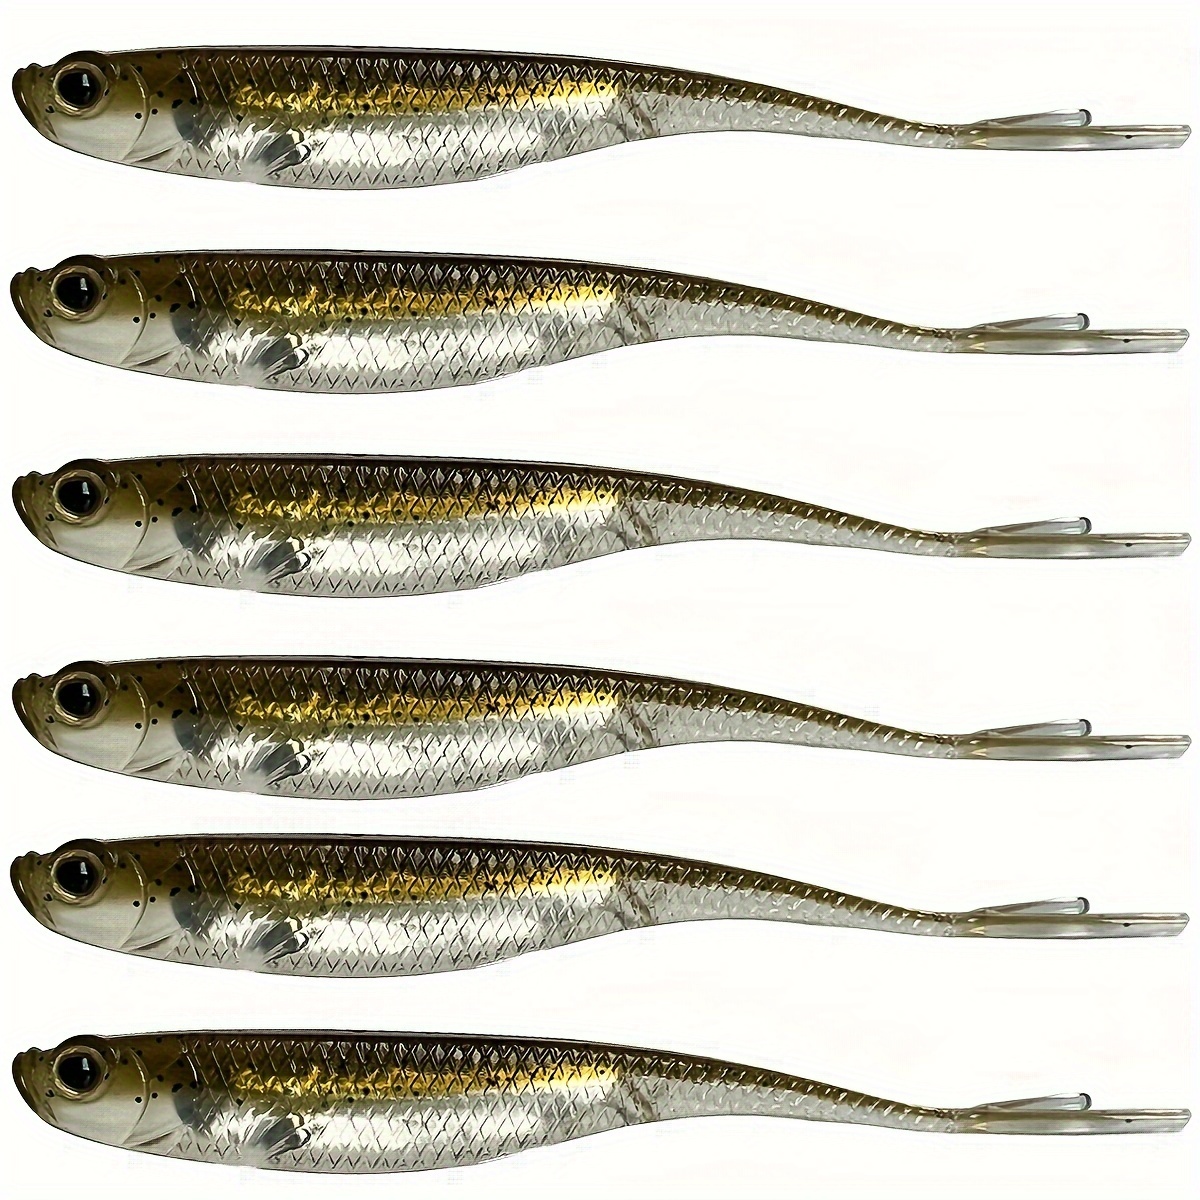 Soft Fishing Lures Swimbaits Minnow Bait Shad Lure Soft Plastic Lure for  Bass Trout Pike Fishing (Color 2, 2.95 - 6Pcs), Soft Plastic Lures -   Canada